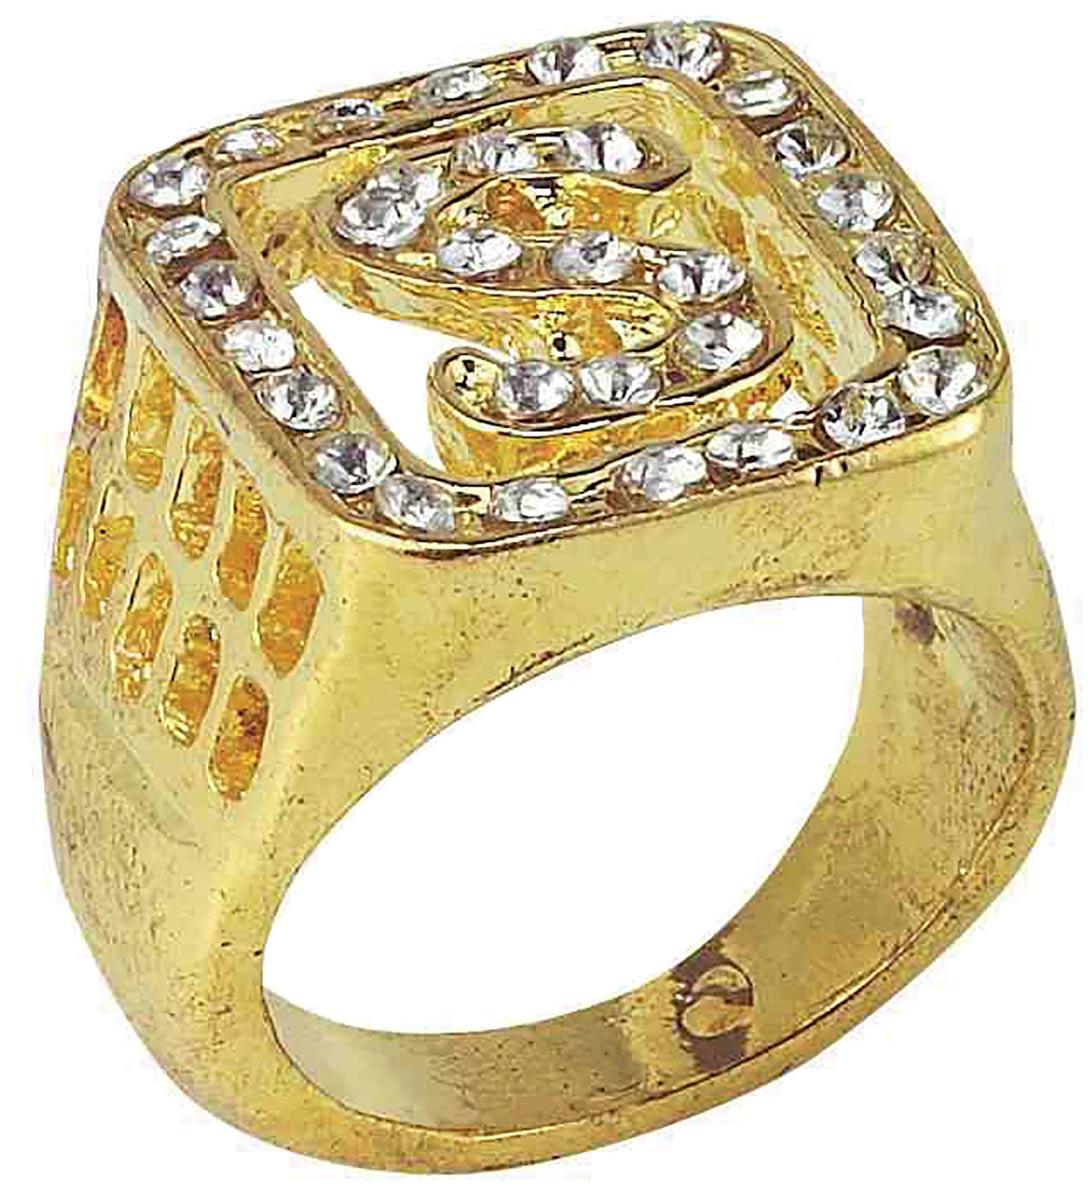 Deluxe Big Daddy Dollar Sign Ring by Bristol Novelties BA878 available here at Karnival Costumes online party shop